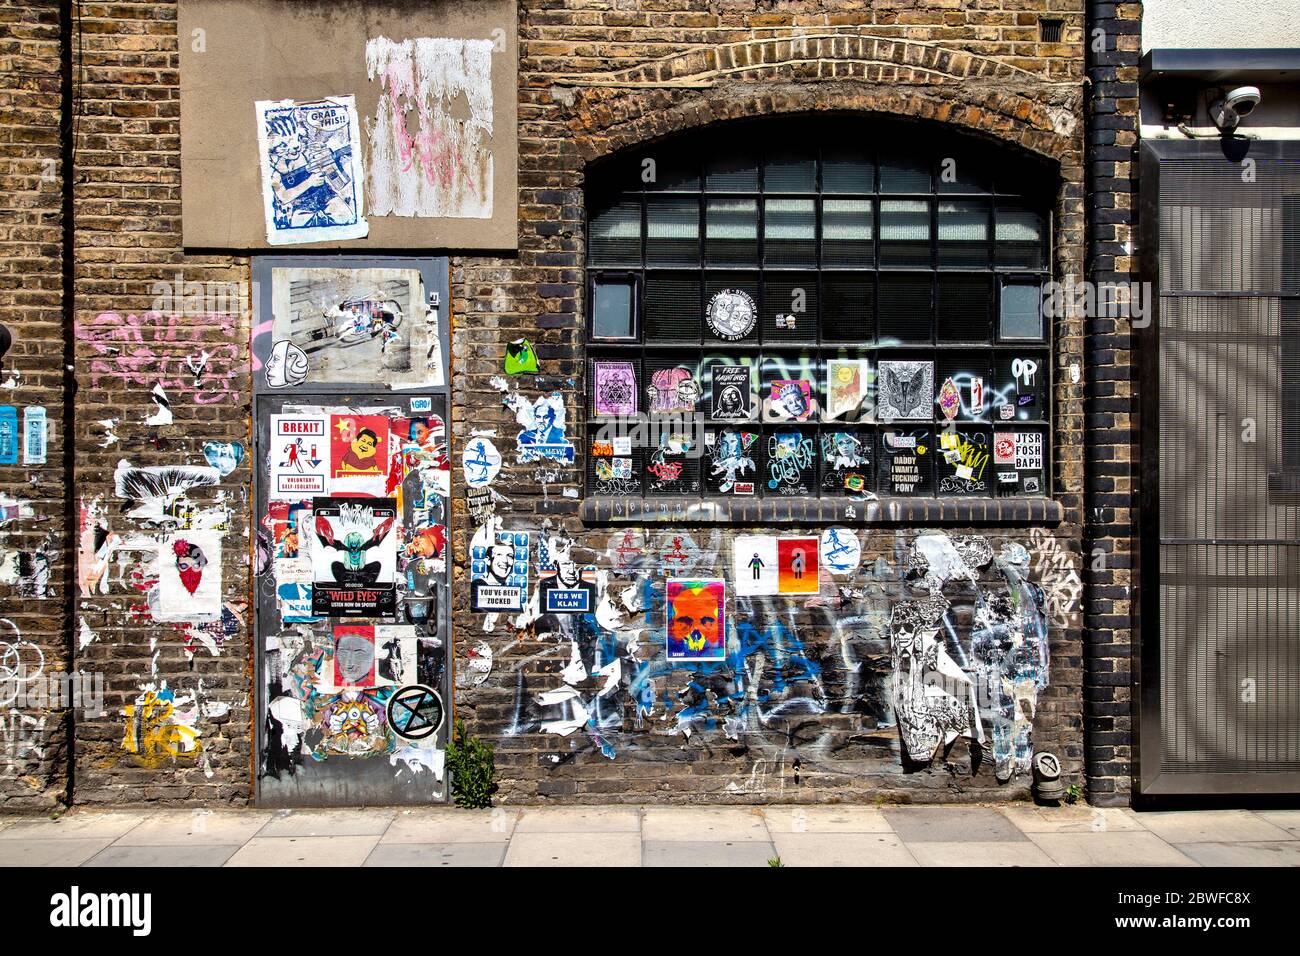 Street posters Alamy photography images - stock hi-res and